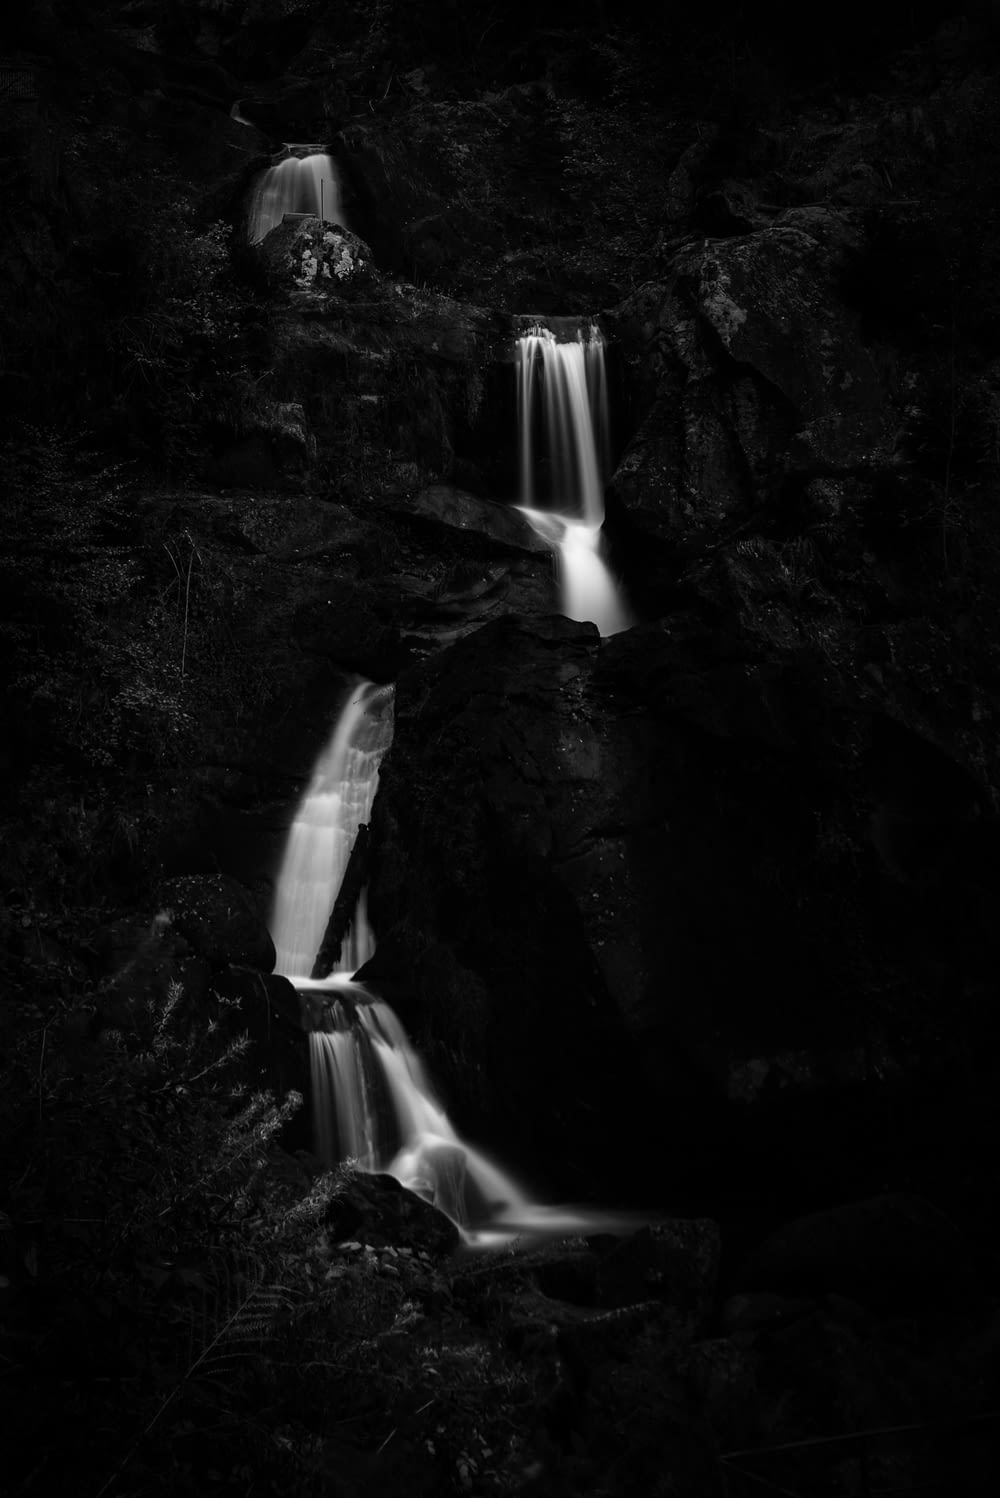 grayscale photography of falls